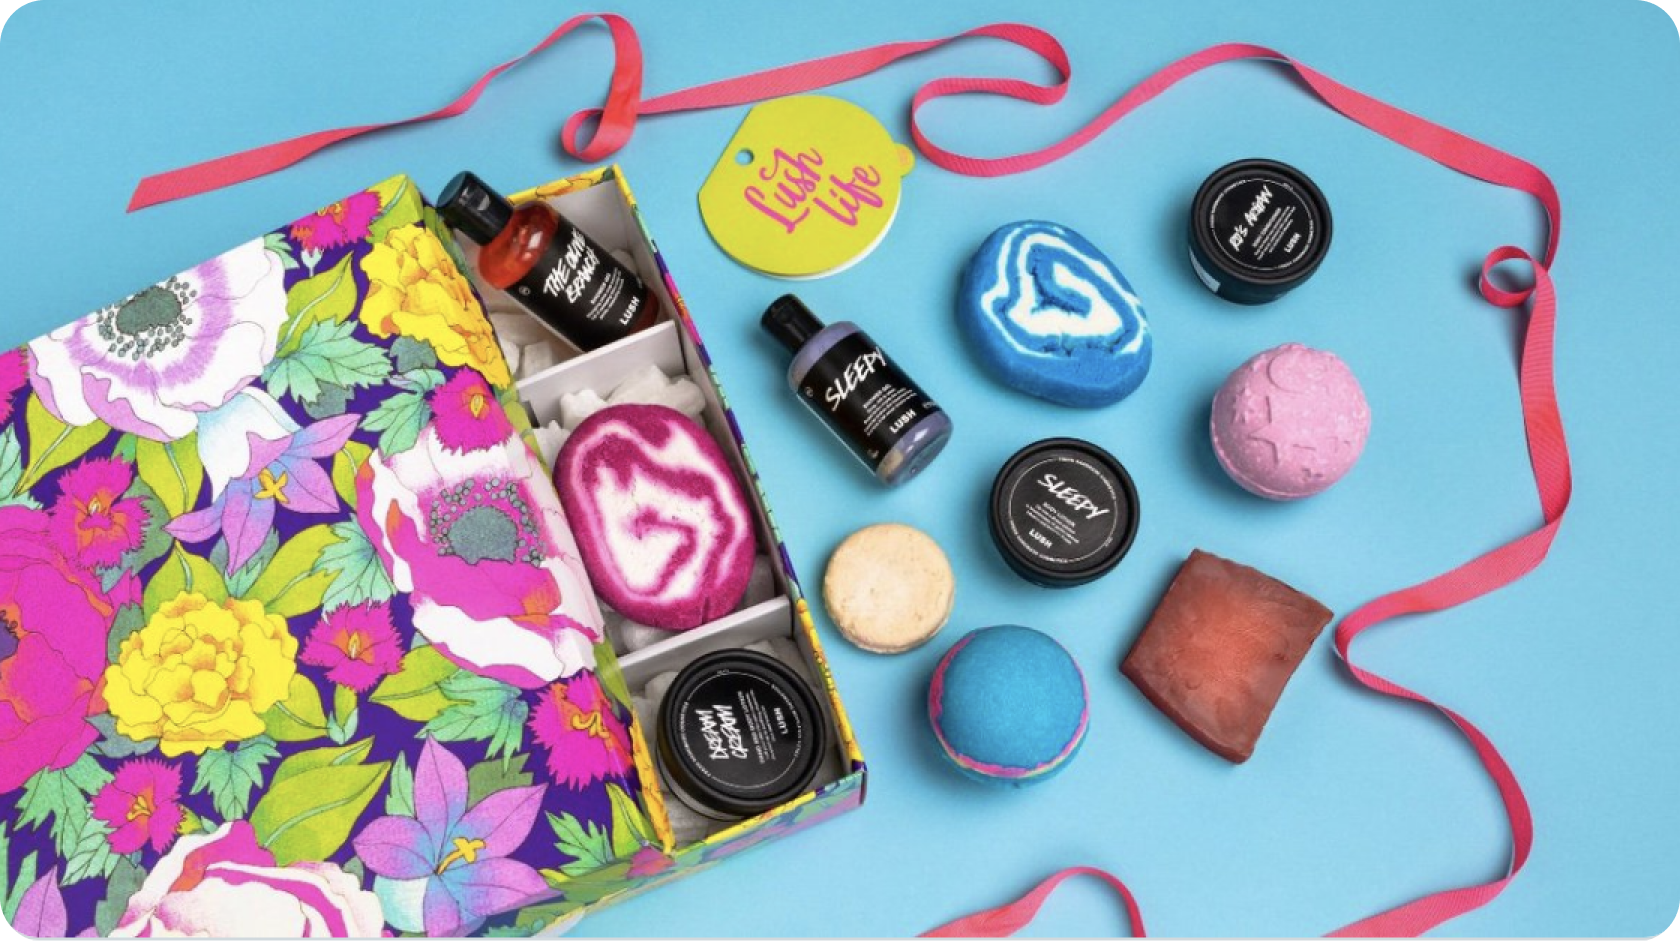 A Tweet on Lush's Twitter page with an image showing cosmetic products from Lush.